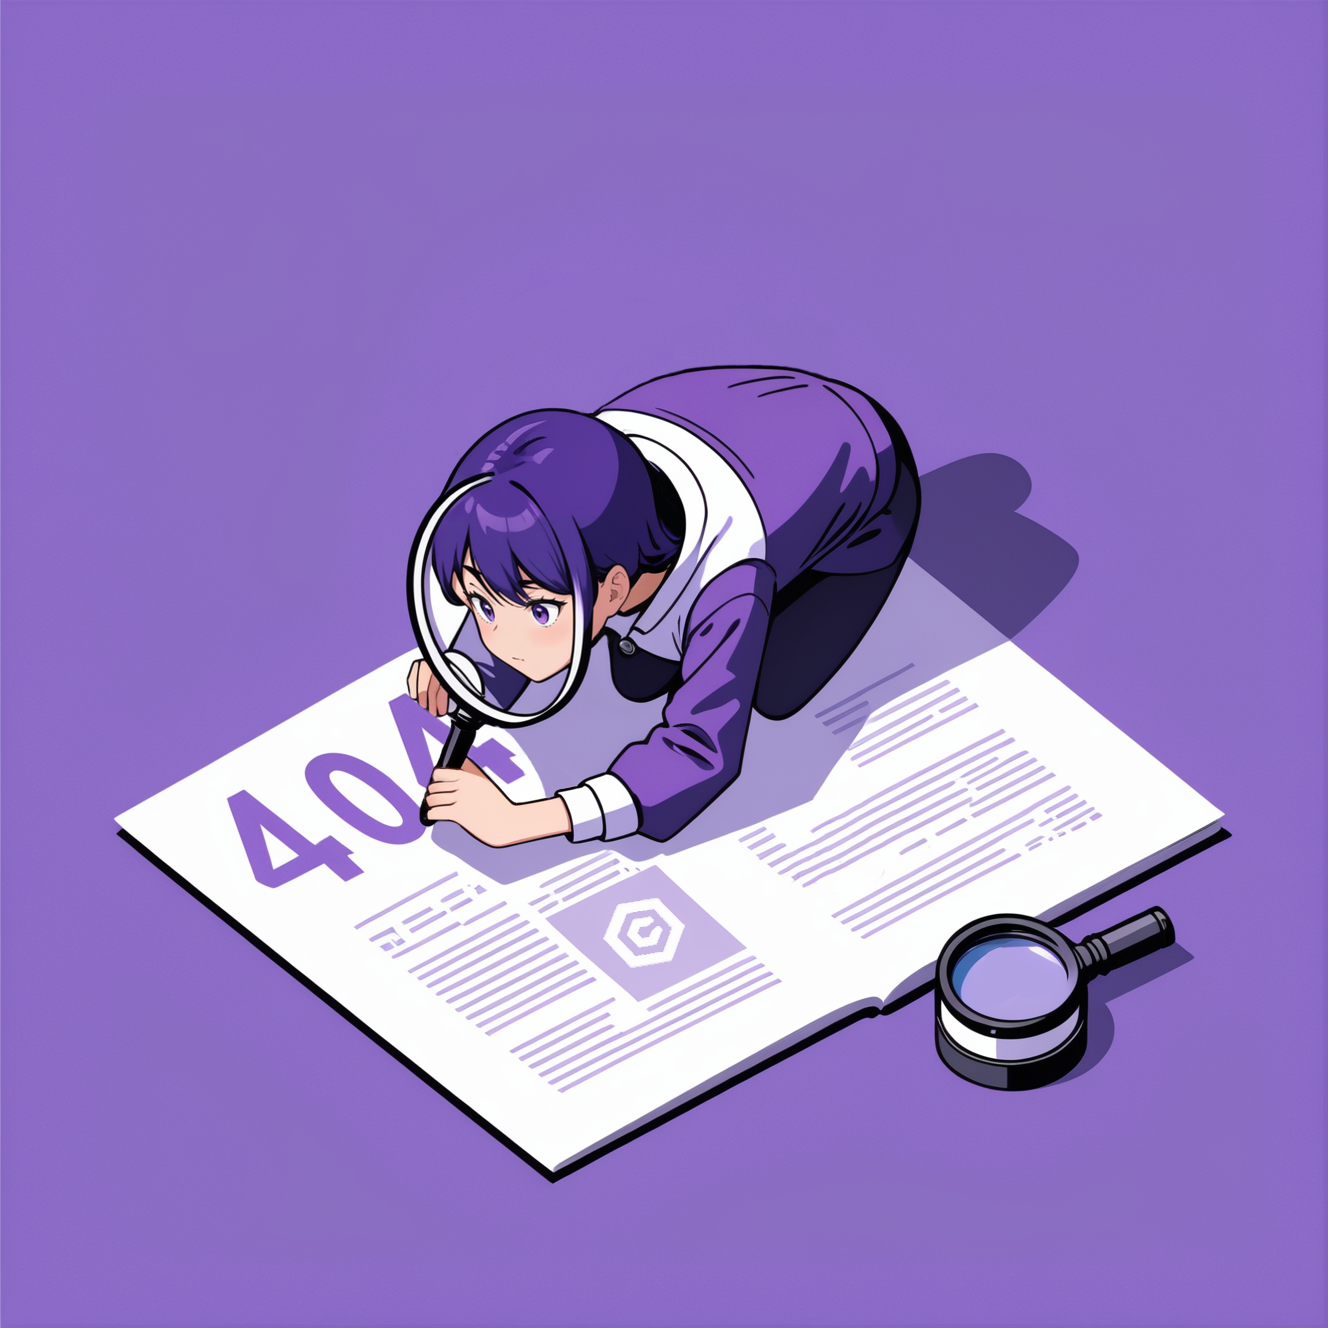 an anime character examining text "404" on the floor with a magnifying glass, simple background, cartoon, violet theme, fl...